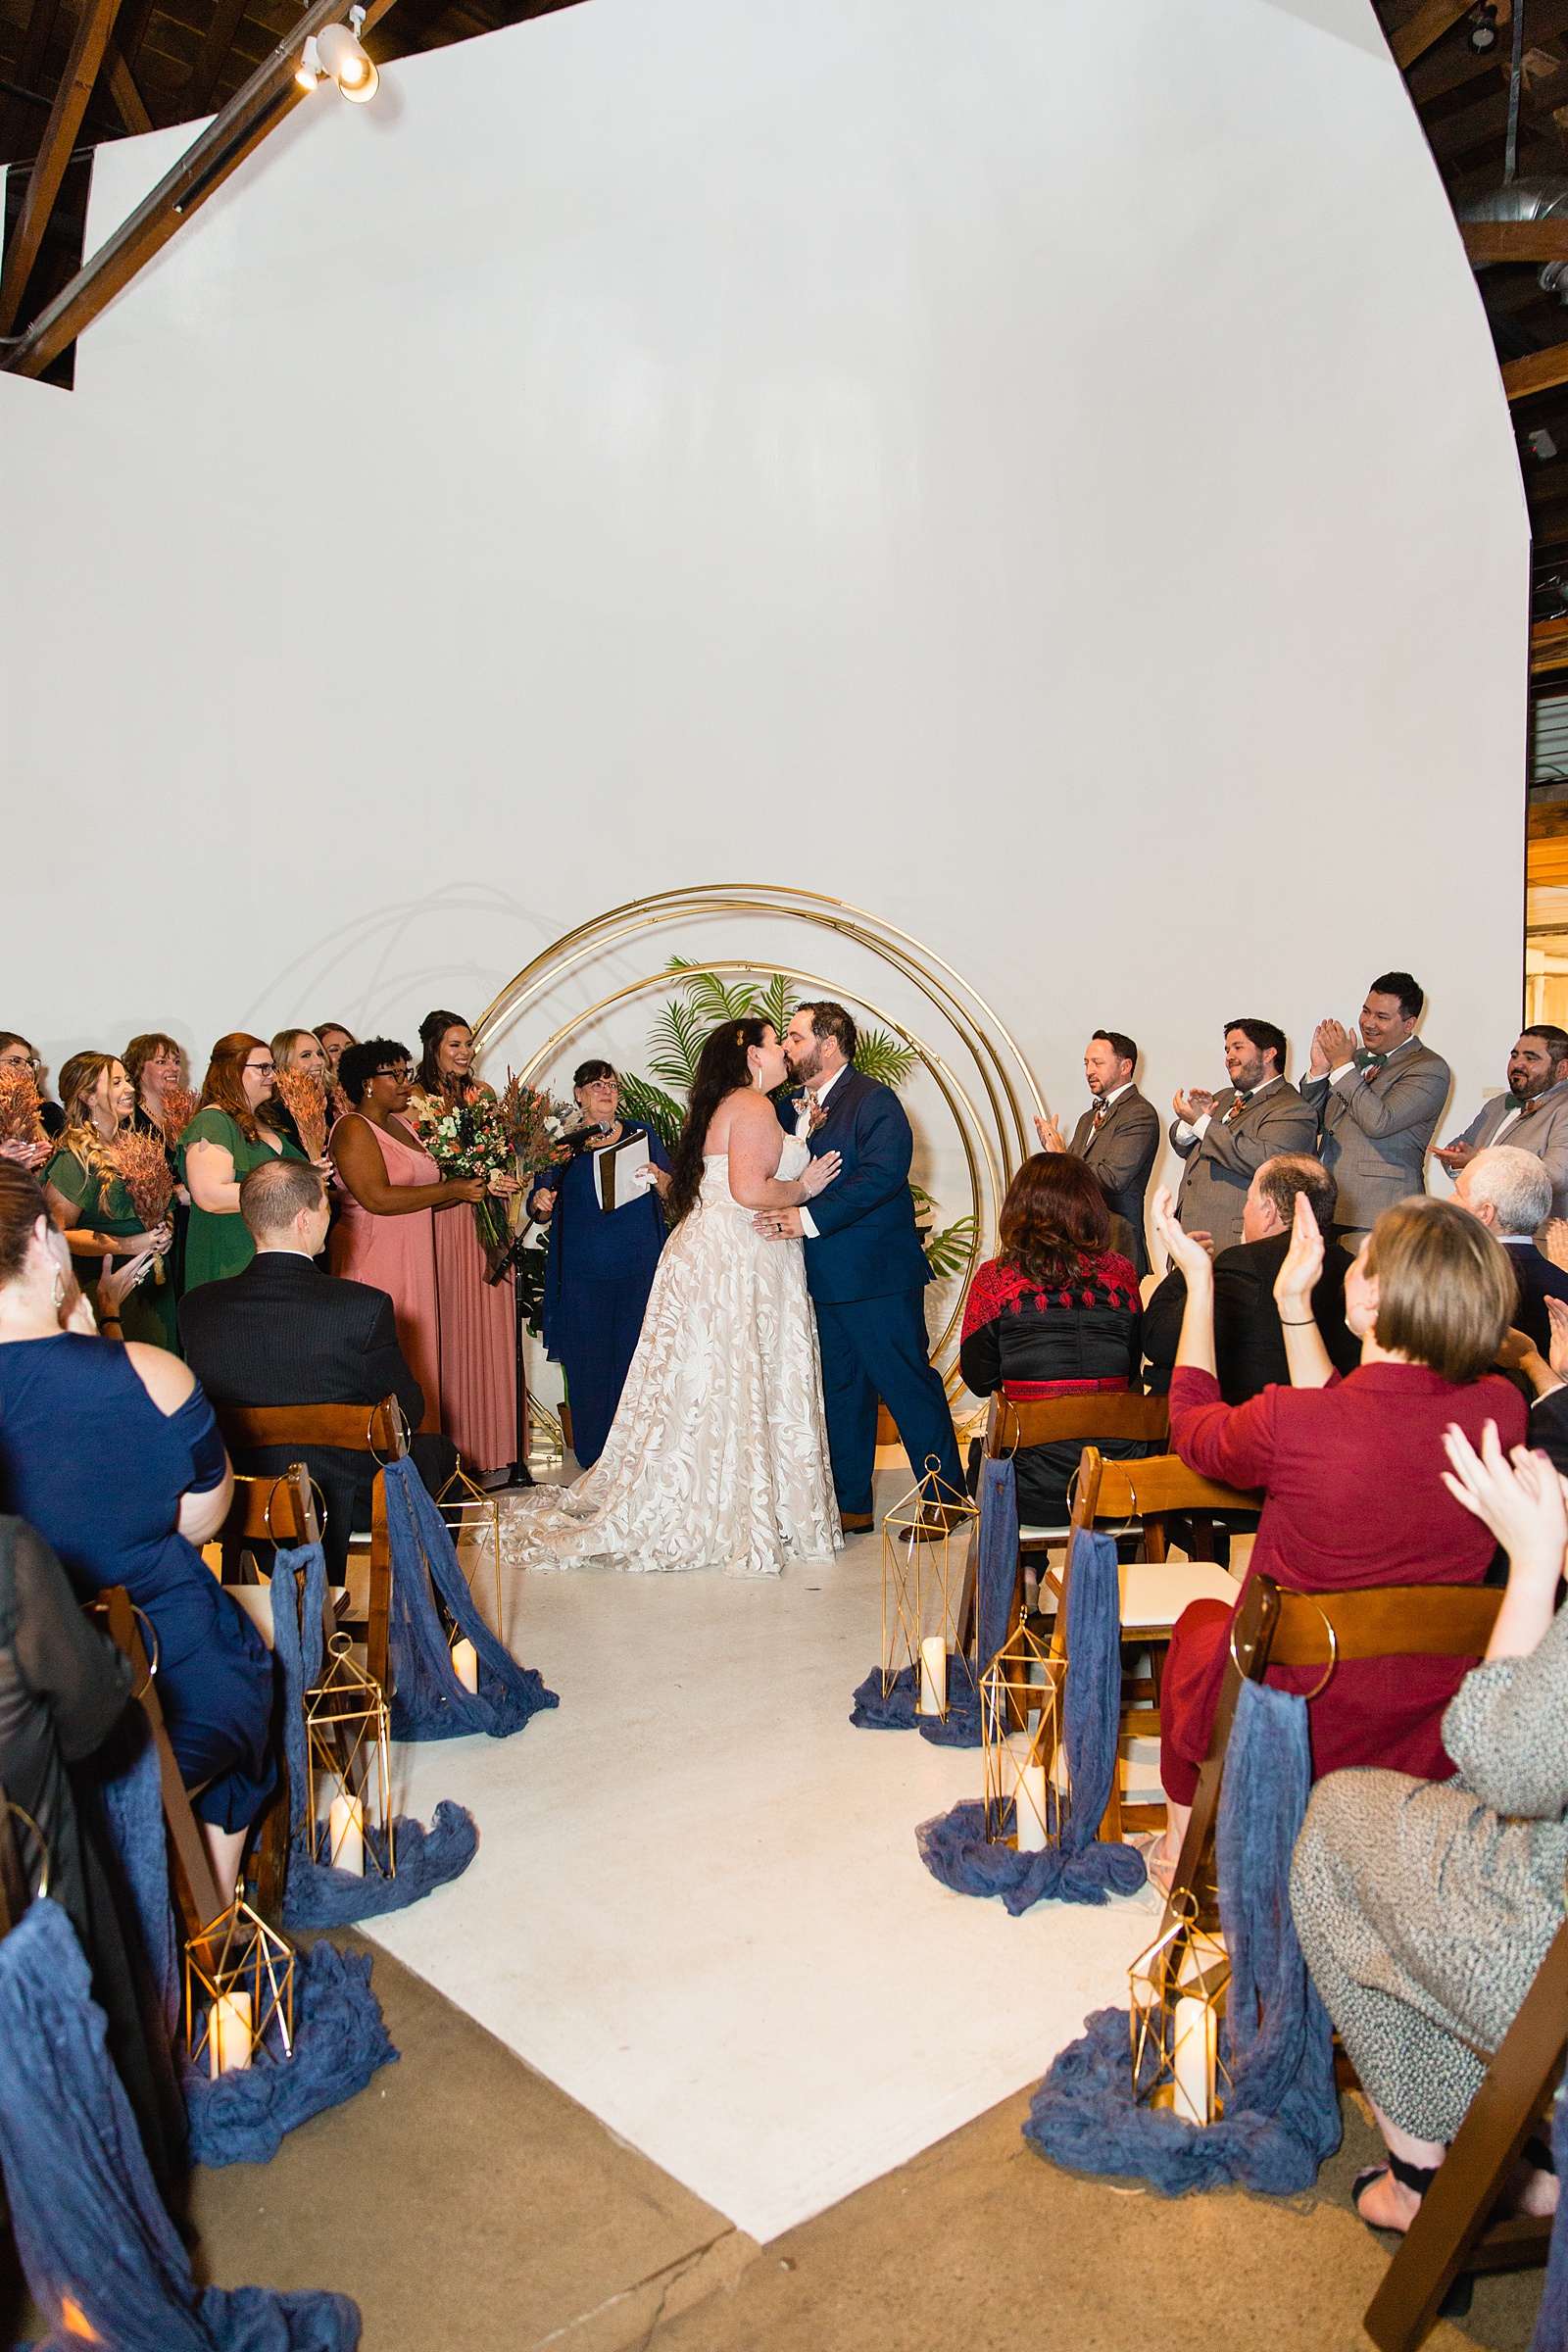 Bride and Groom share their first kiss during their wedding ceremony at MonOrchid by Arizona wedding photographer PMA Photography.